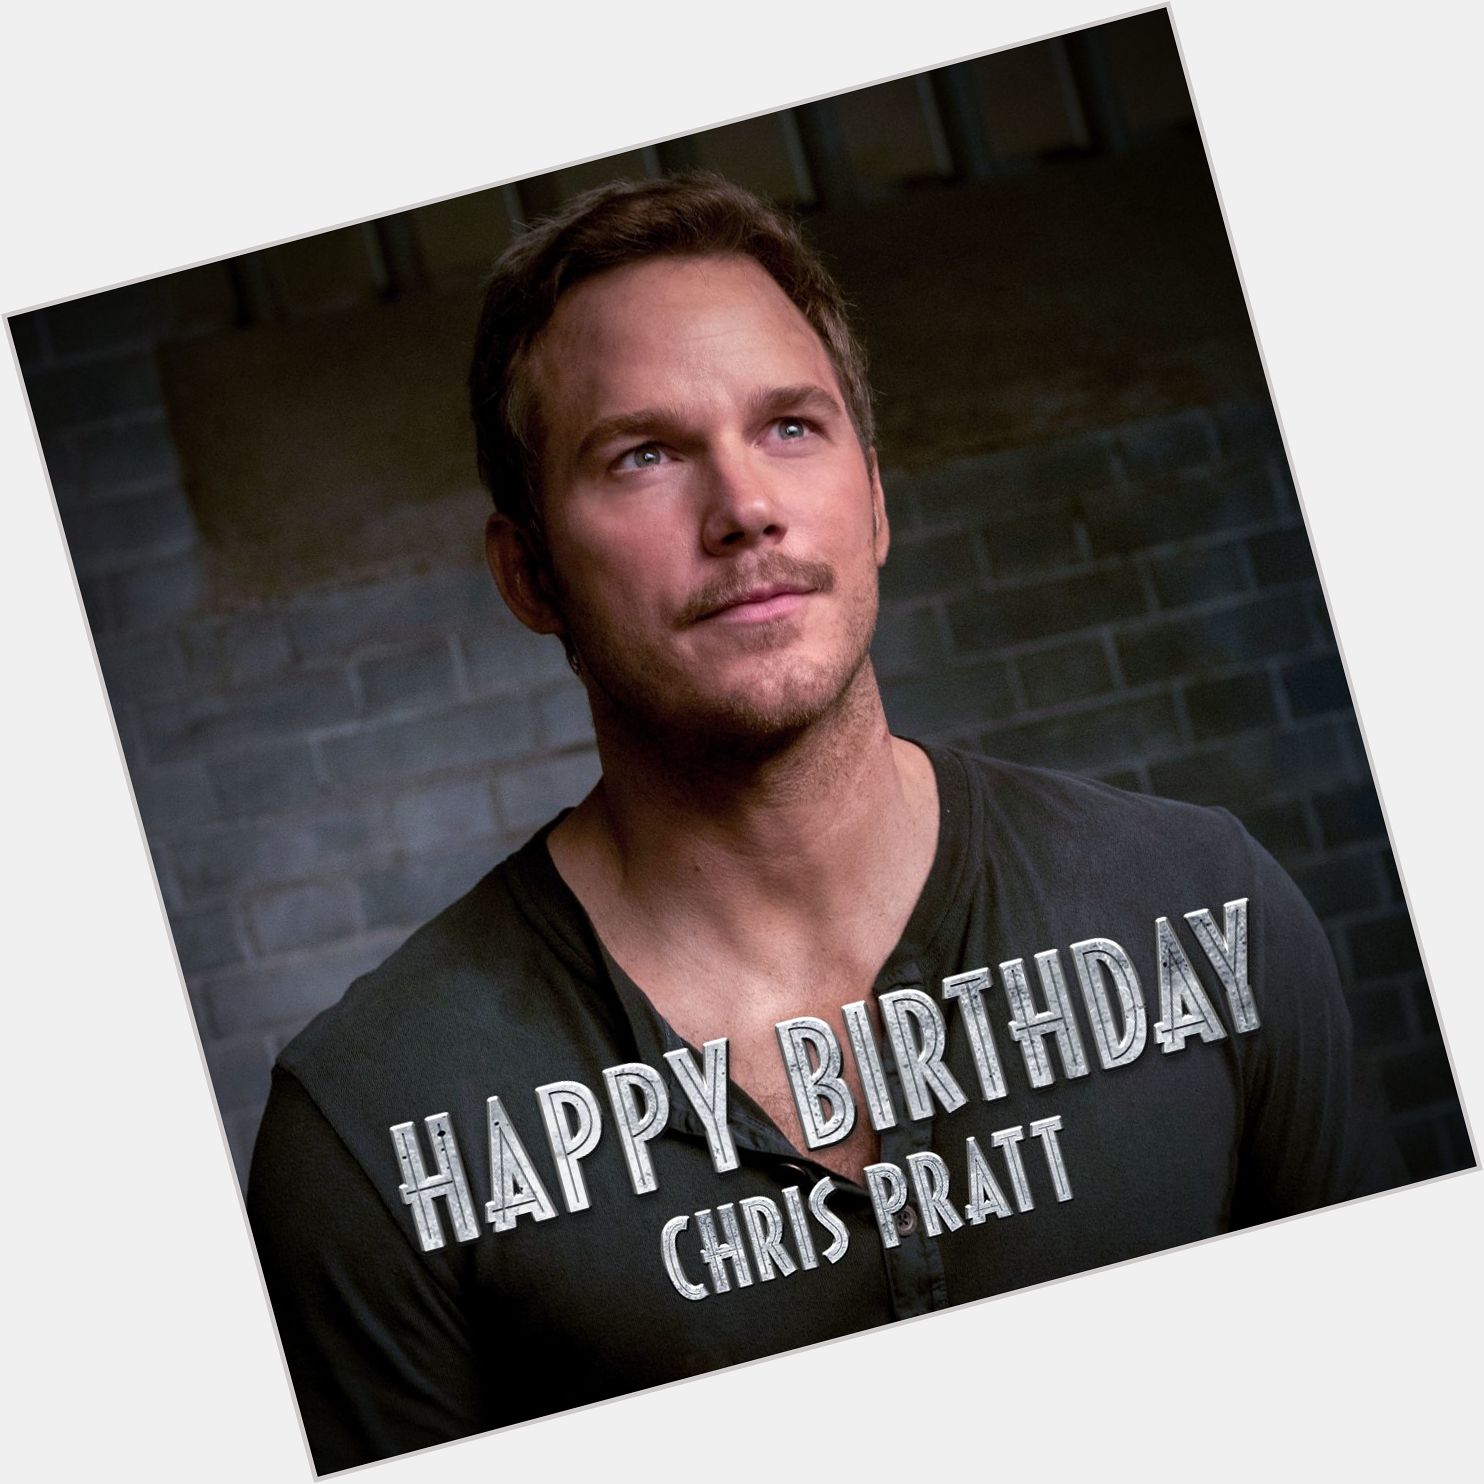 Happy Birthday to Chris Pratt! Cheers and we hope your diet allows for tequila. 